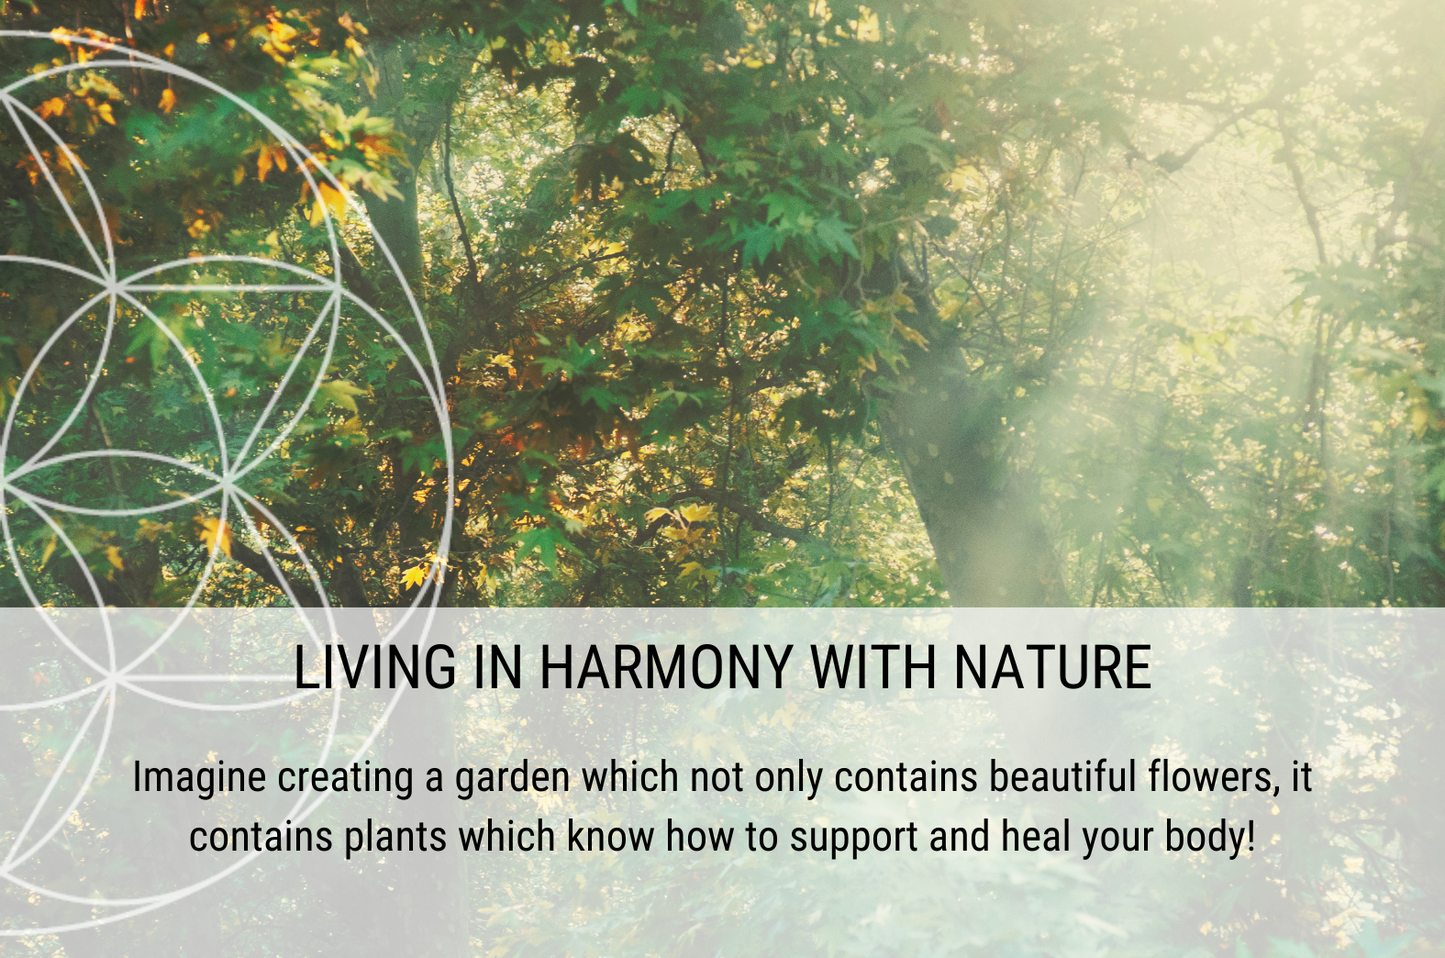 Living in Harmony with Nature